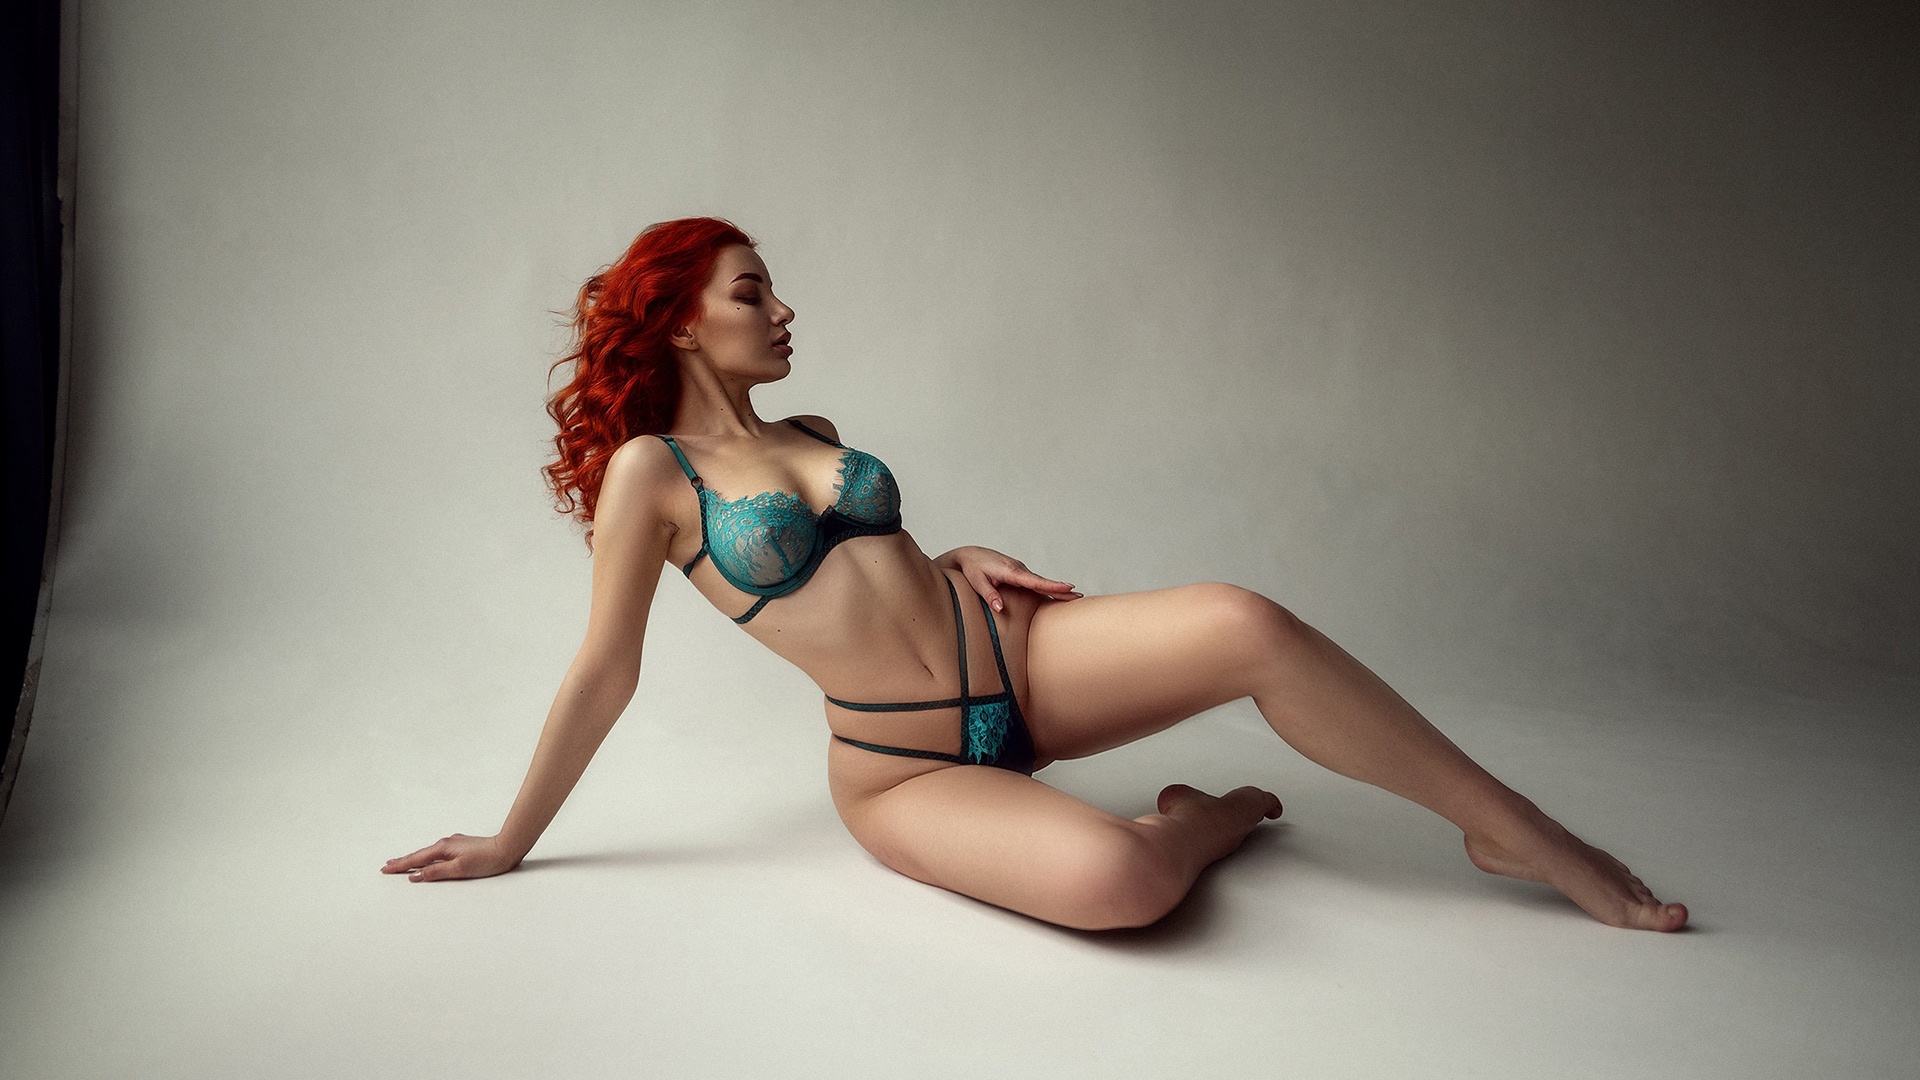 Sexy curves redhead in green lace lingerie on the floor showing her fine body erotic hd wallpaper 1920x1080 nude models and pornstars wallpapers